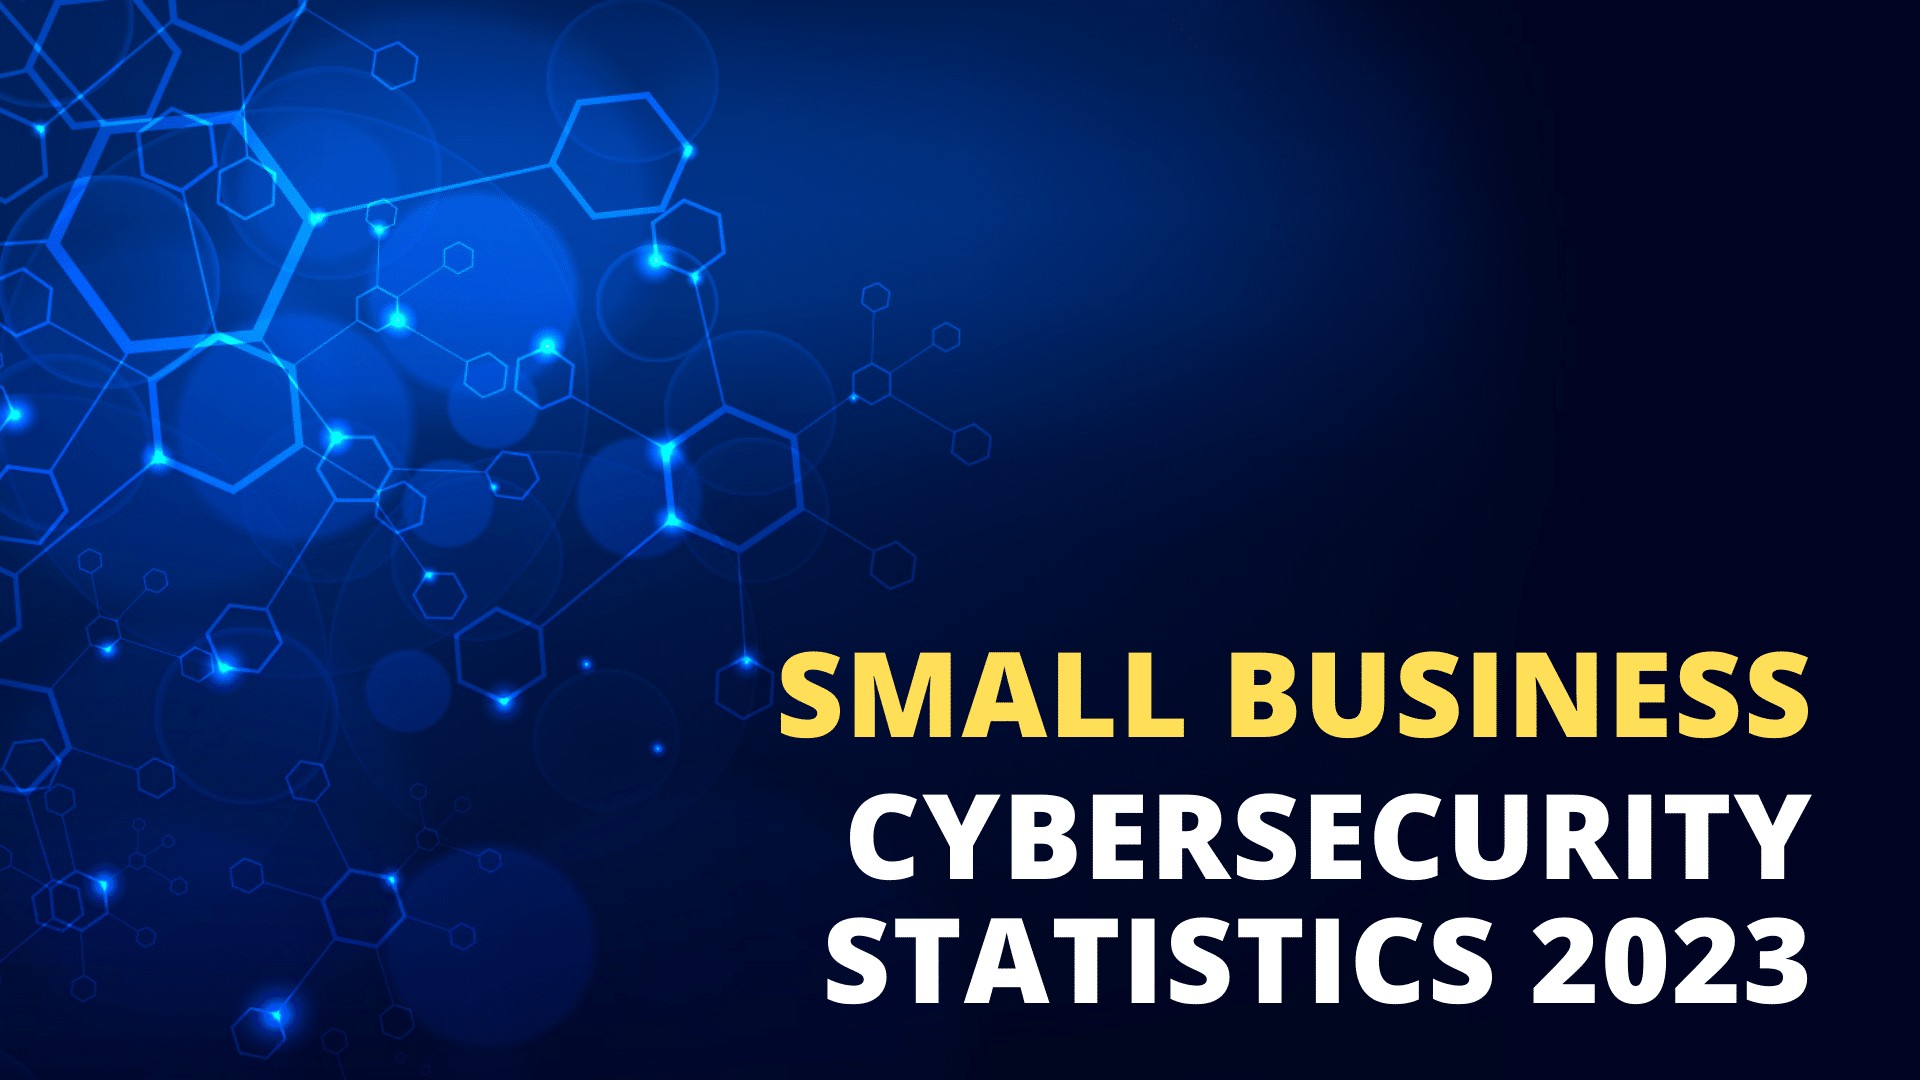 Small Business Cybersecurity Statistics 2023